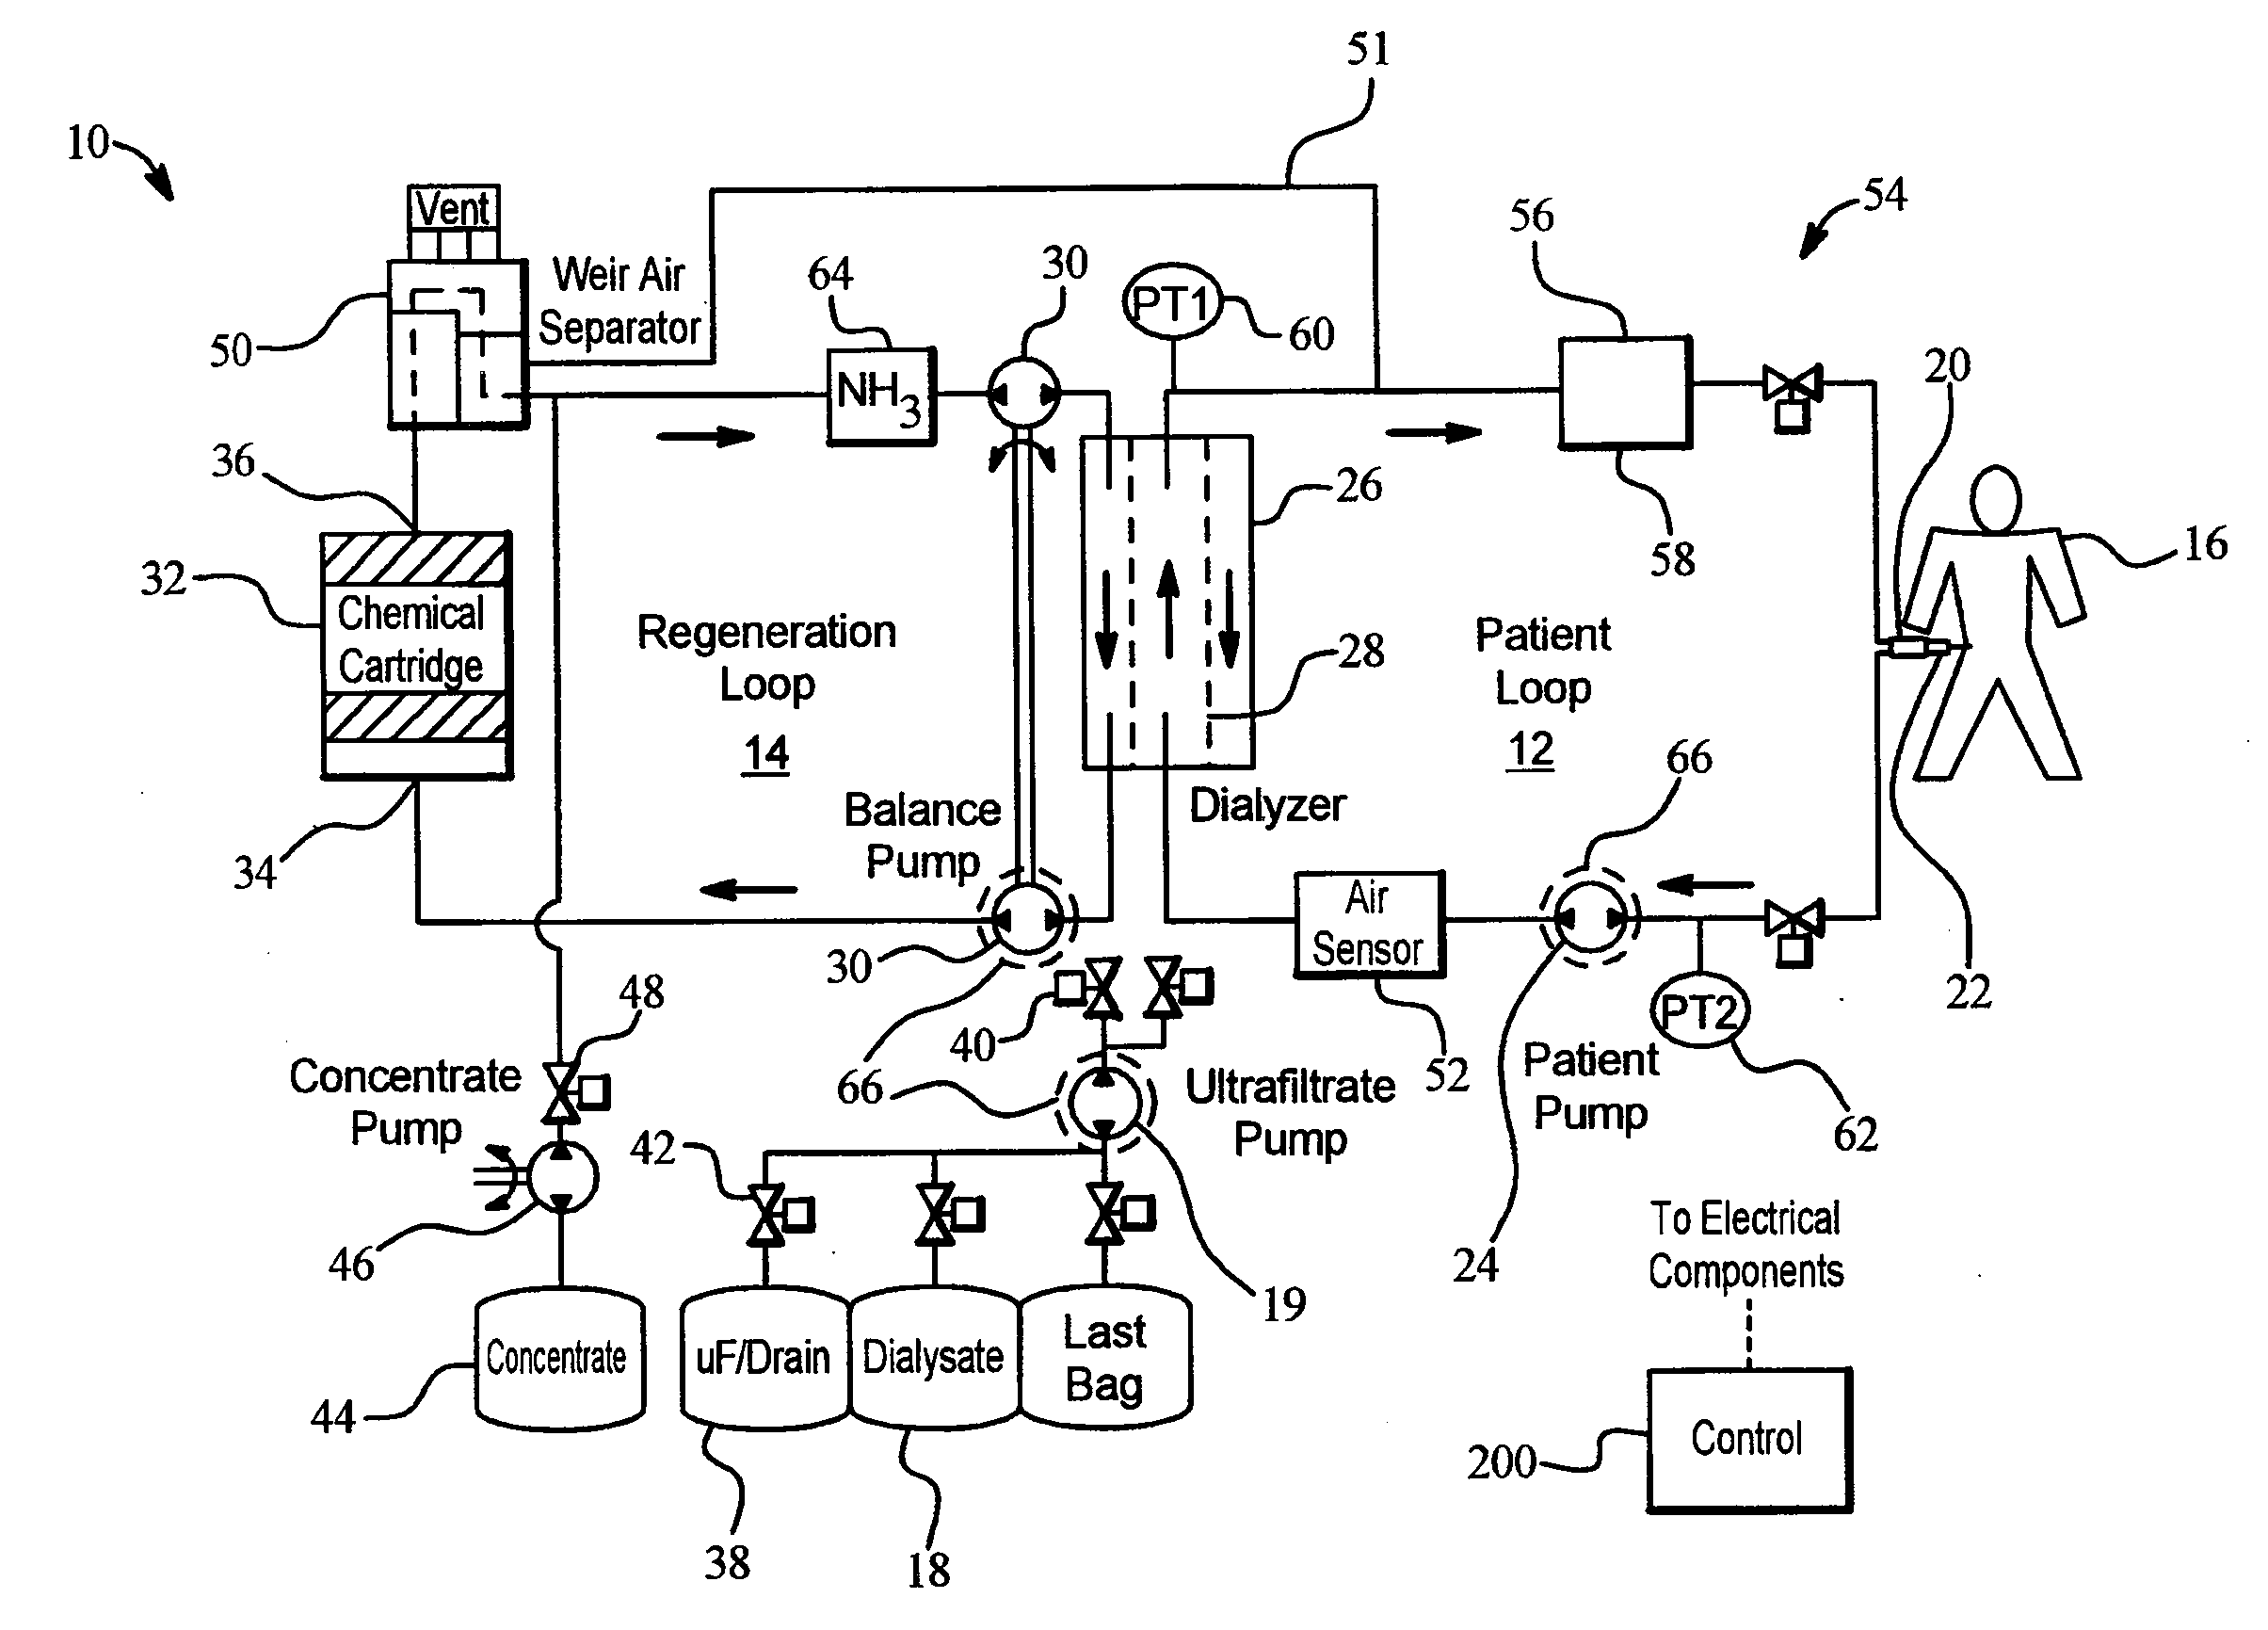 Weight/sensor-controlled sorbent system for hemodialysis